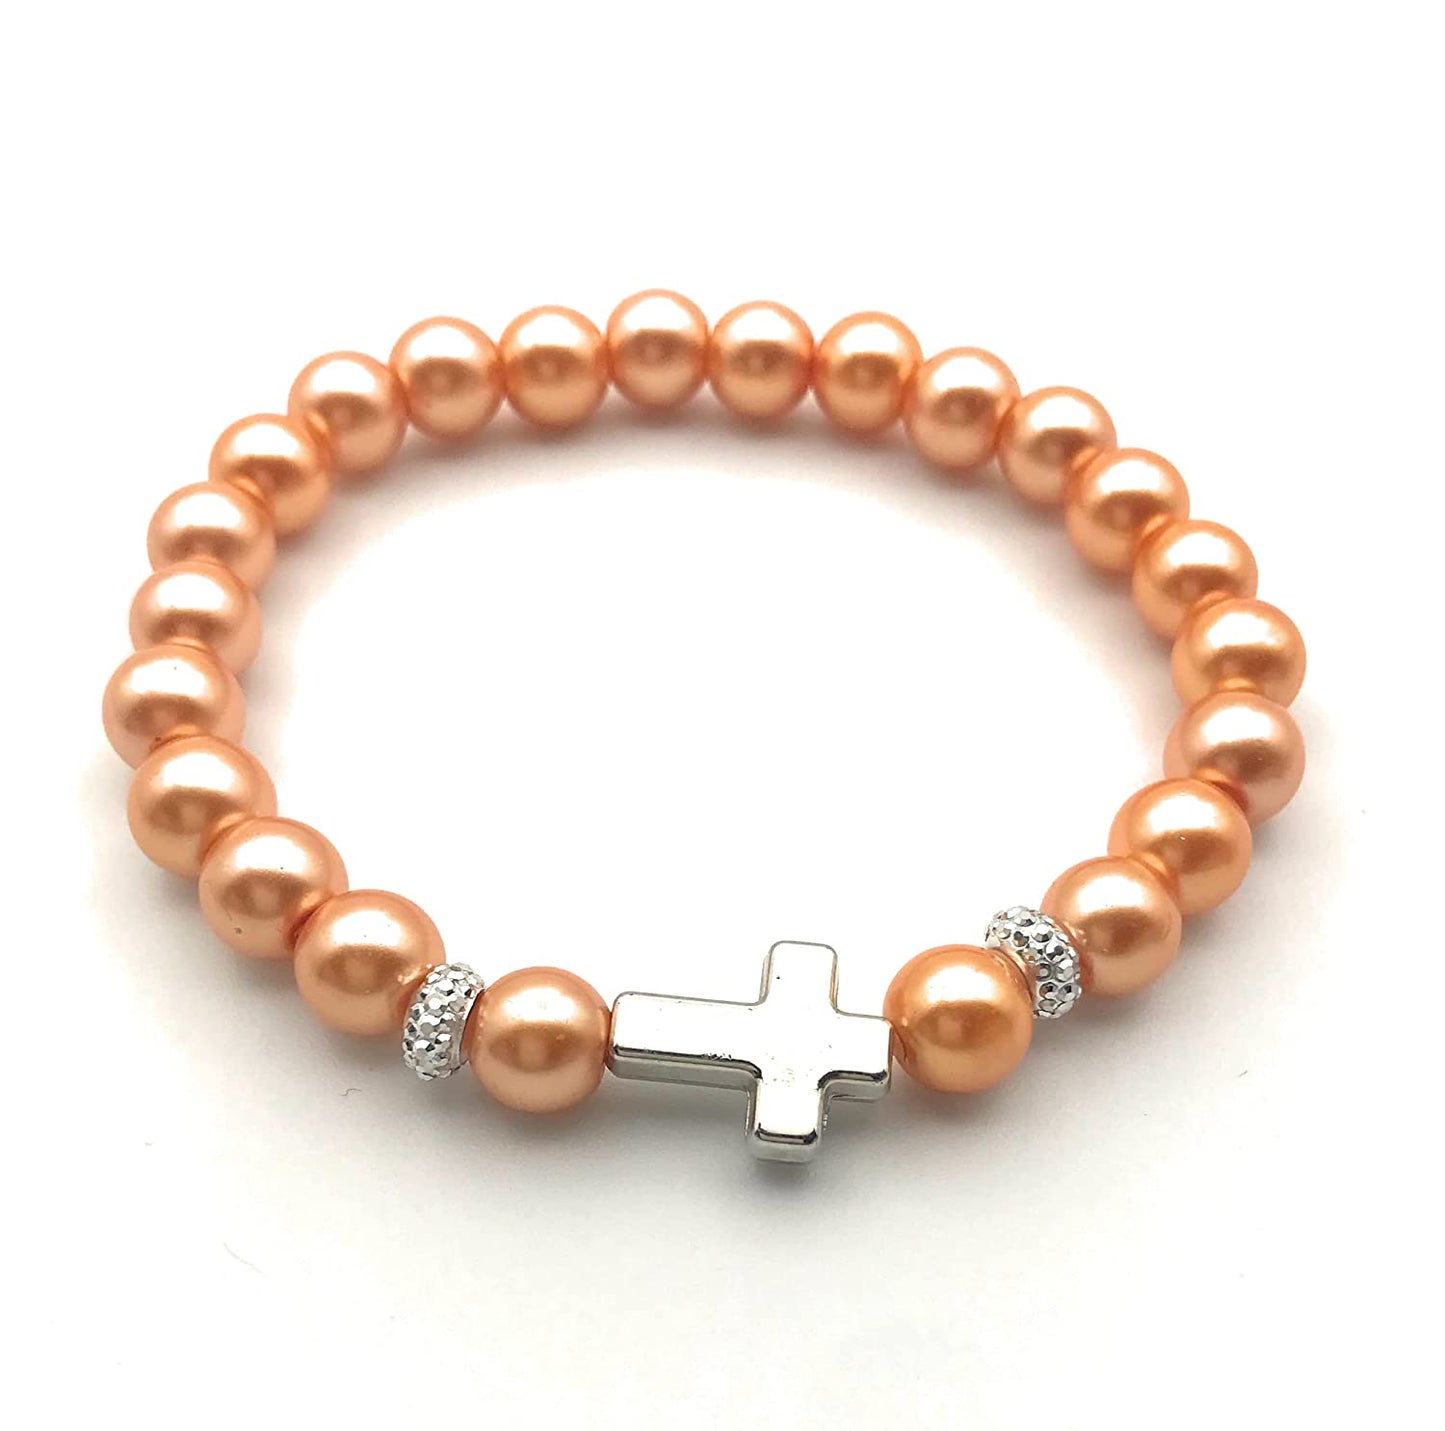 Orange Faux Pearl Beaded Stretch Bracelet with Silver Side Cross Accent